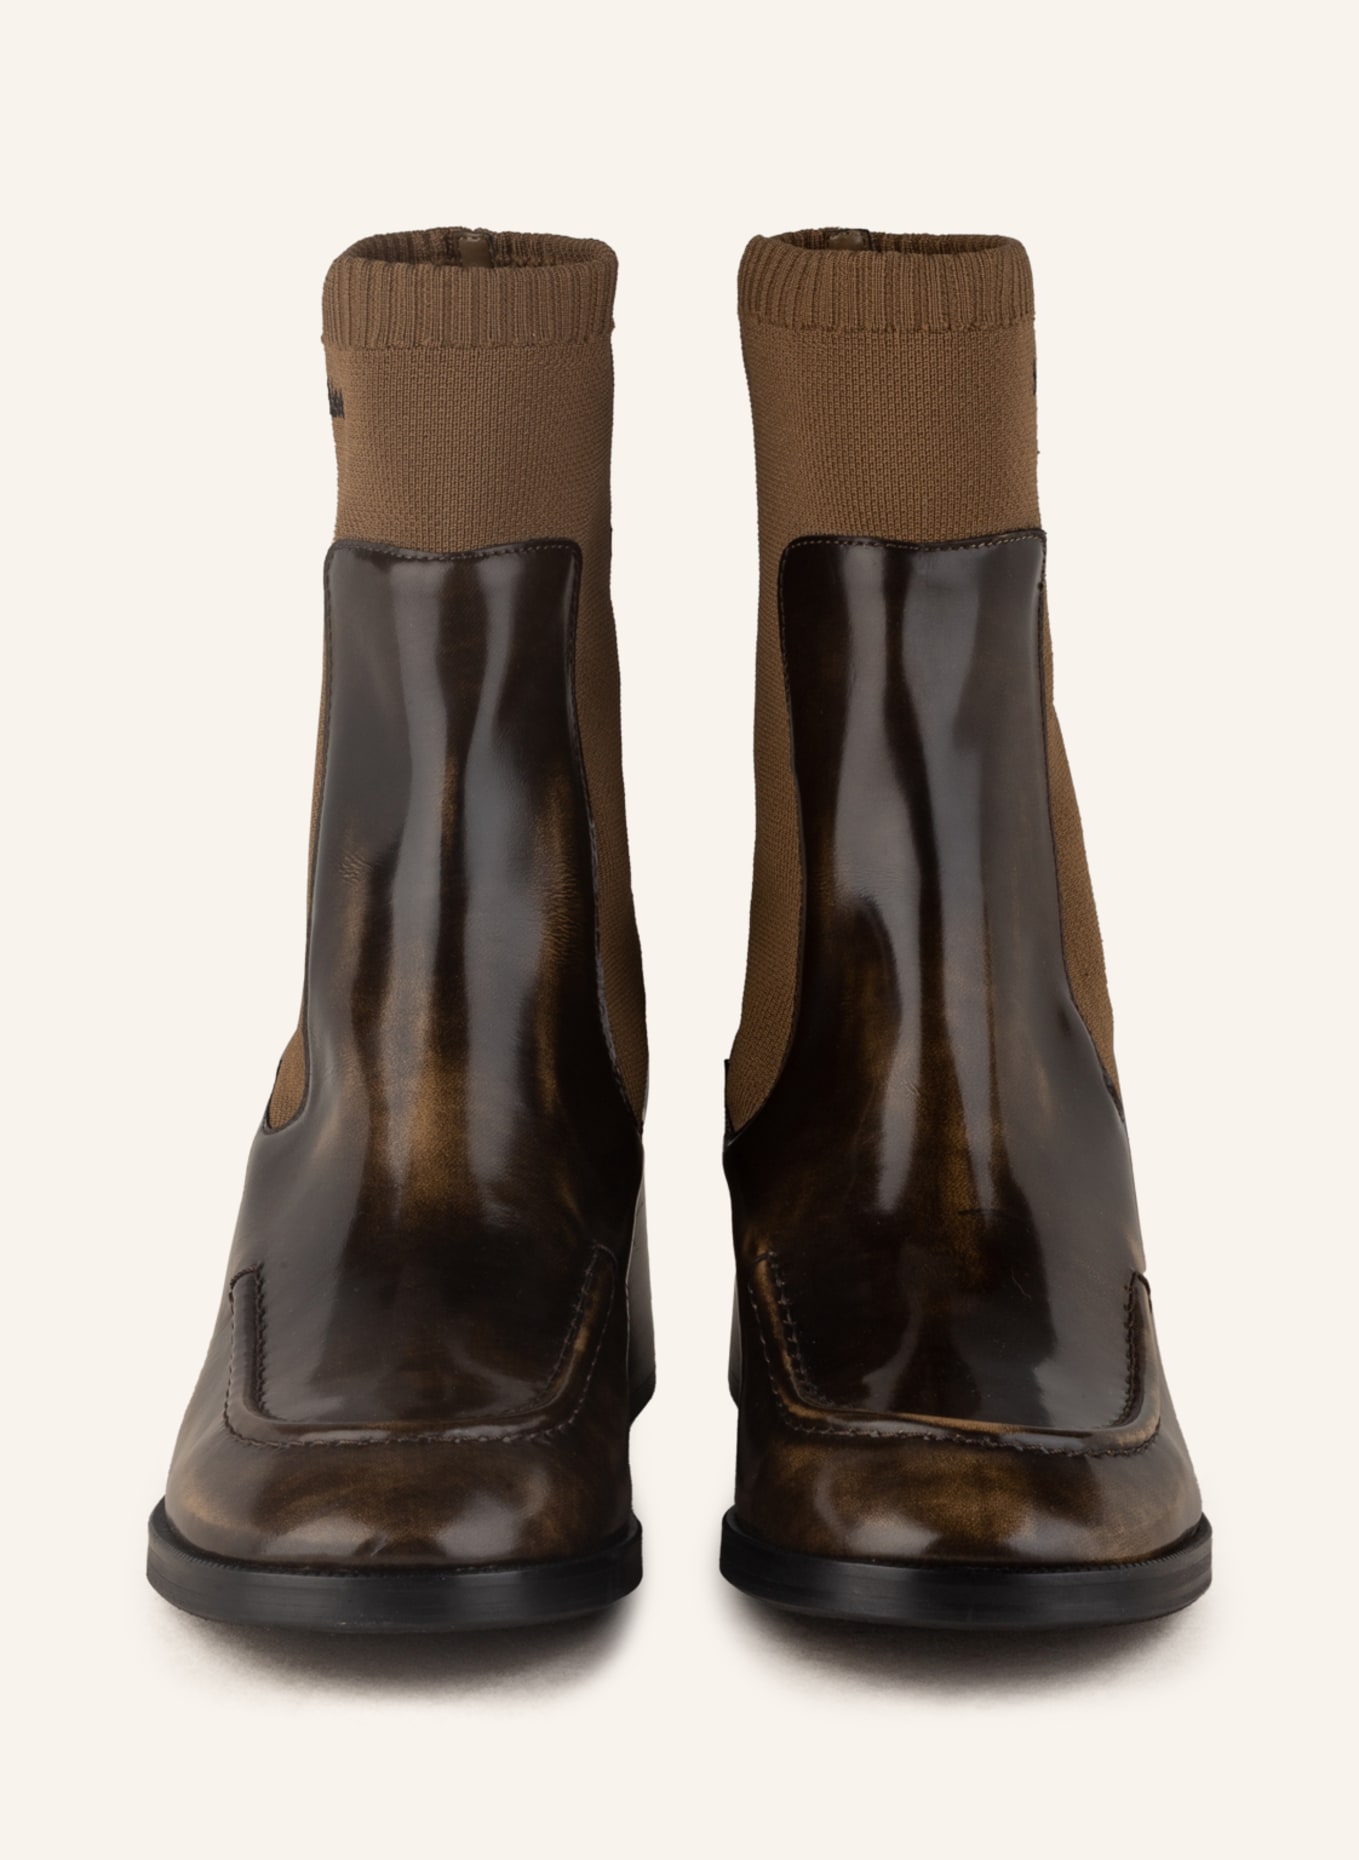 SEE BY CHLOÉ Chelsea-Boots WENDY, Farbe: 110/415 Olive (Bild 3)